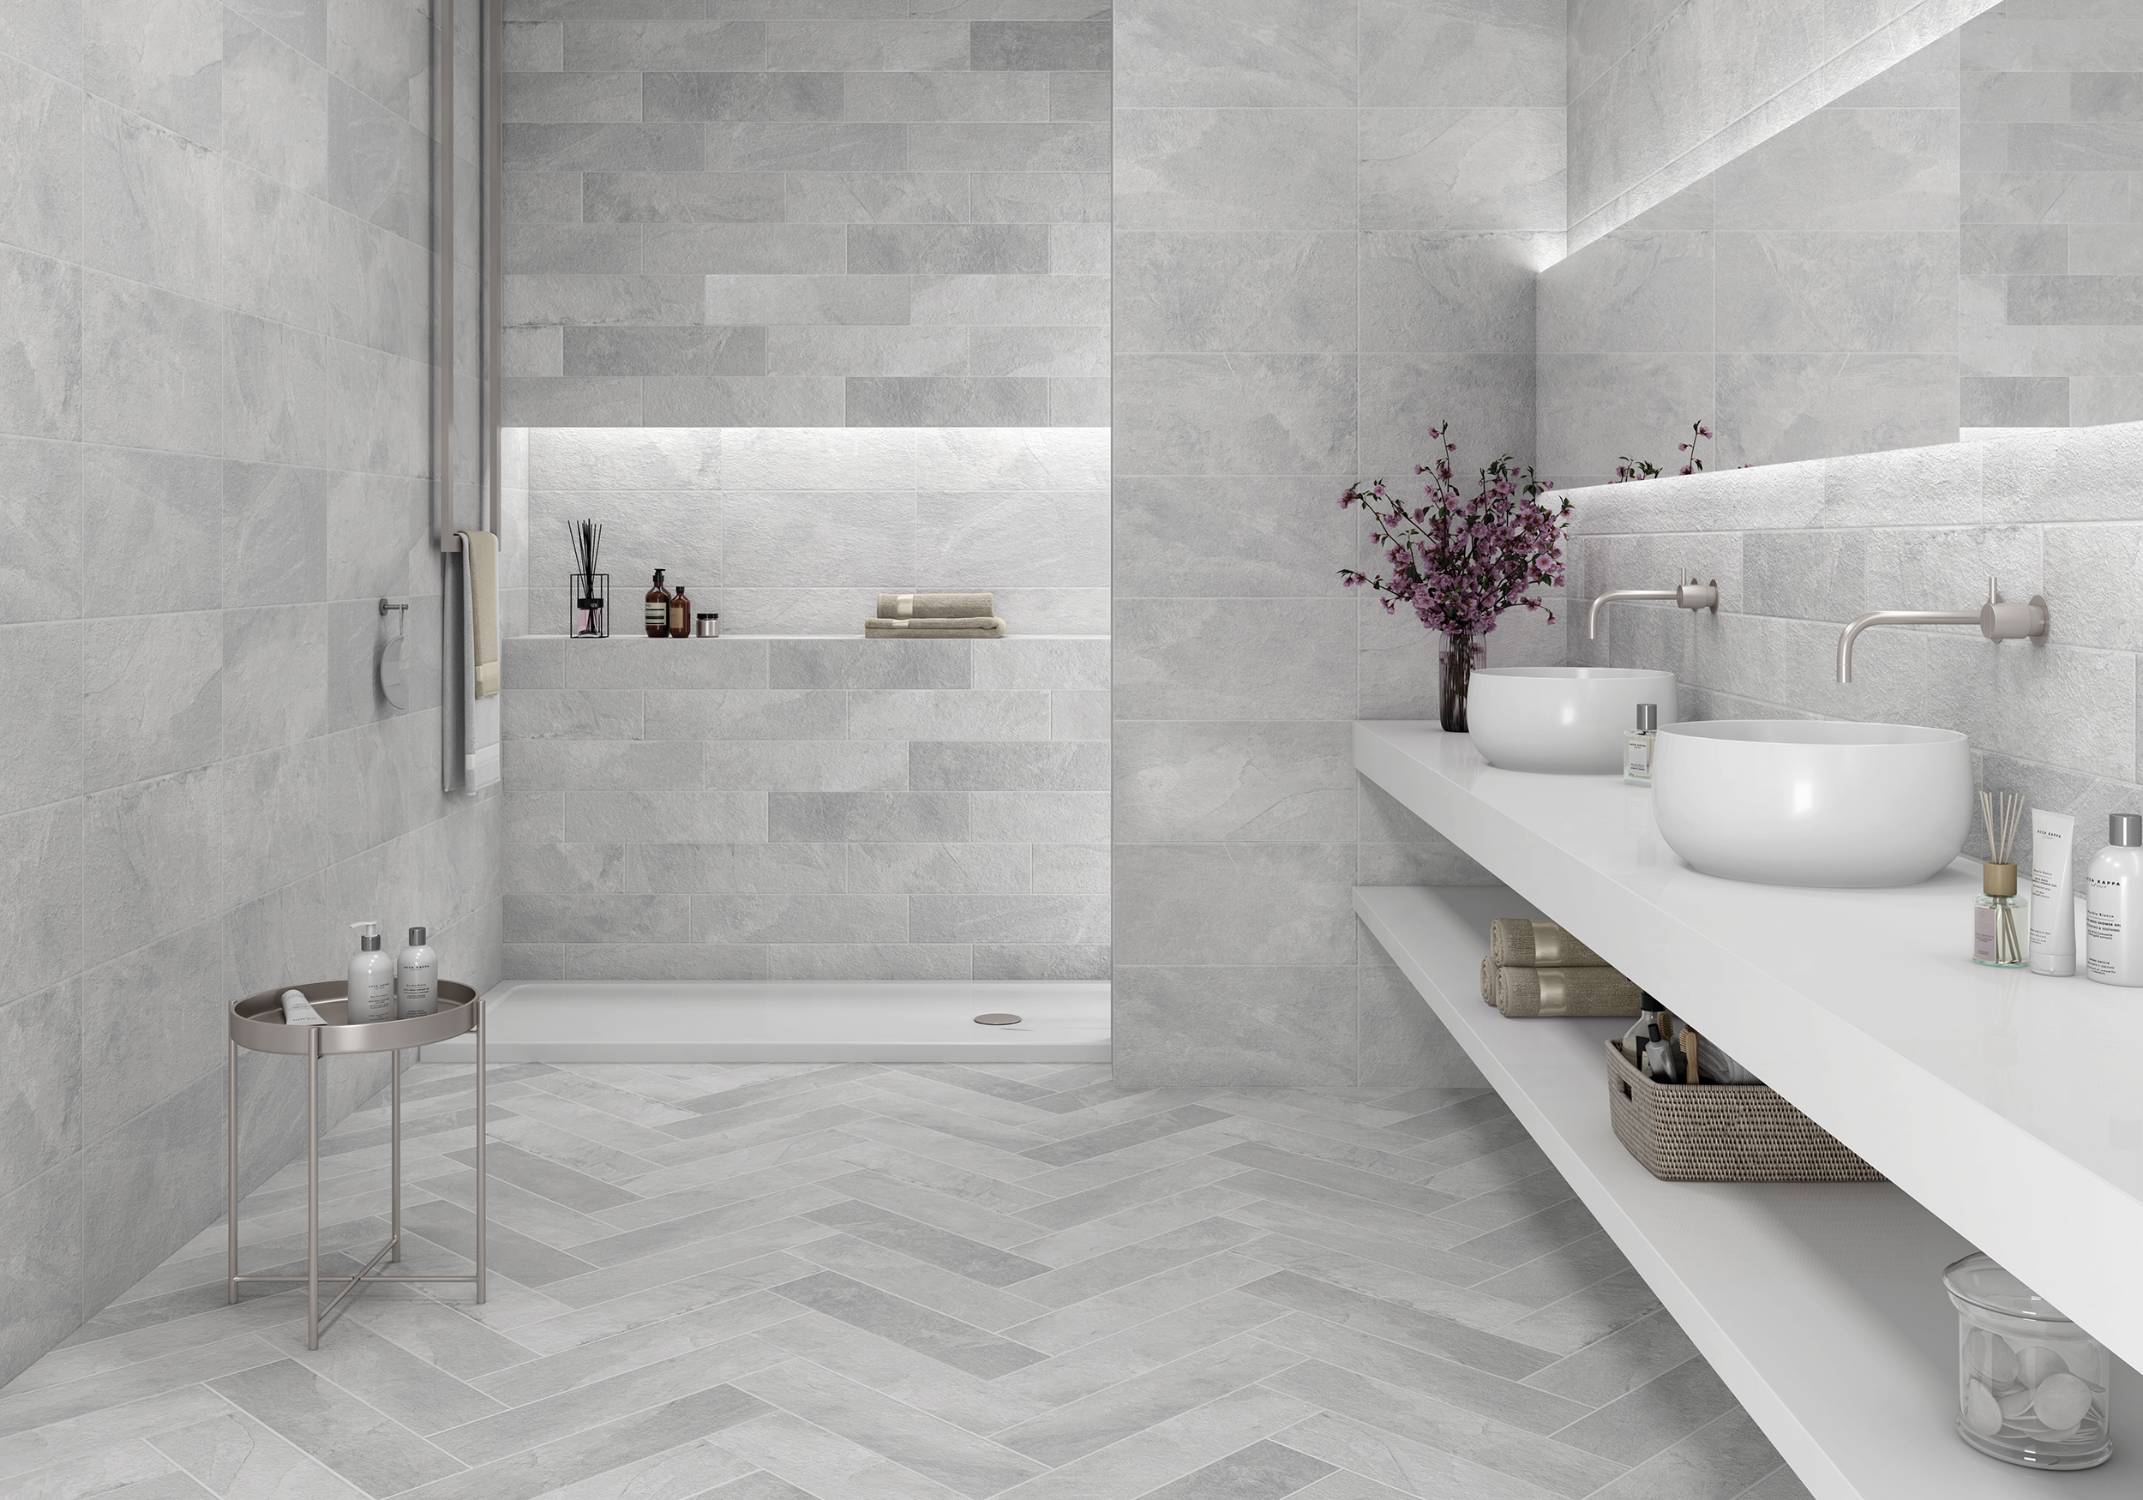 Lulworth Stone - Stone Effect Porcelain Floor and Wall Tile Collection